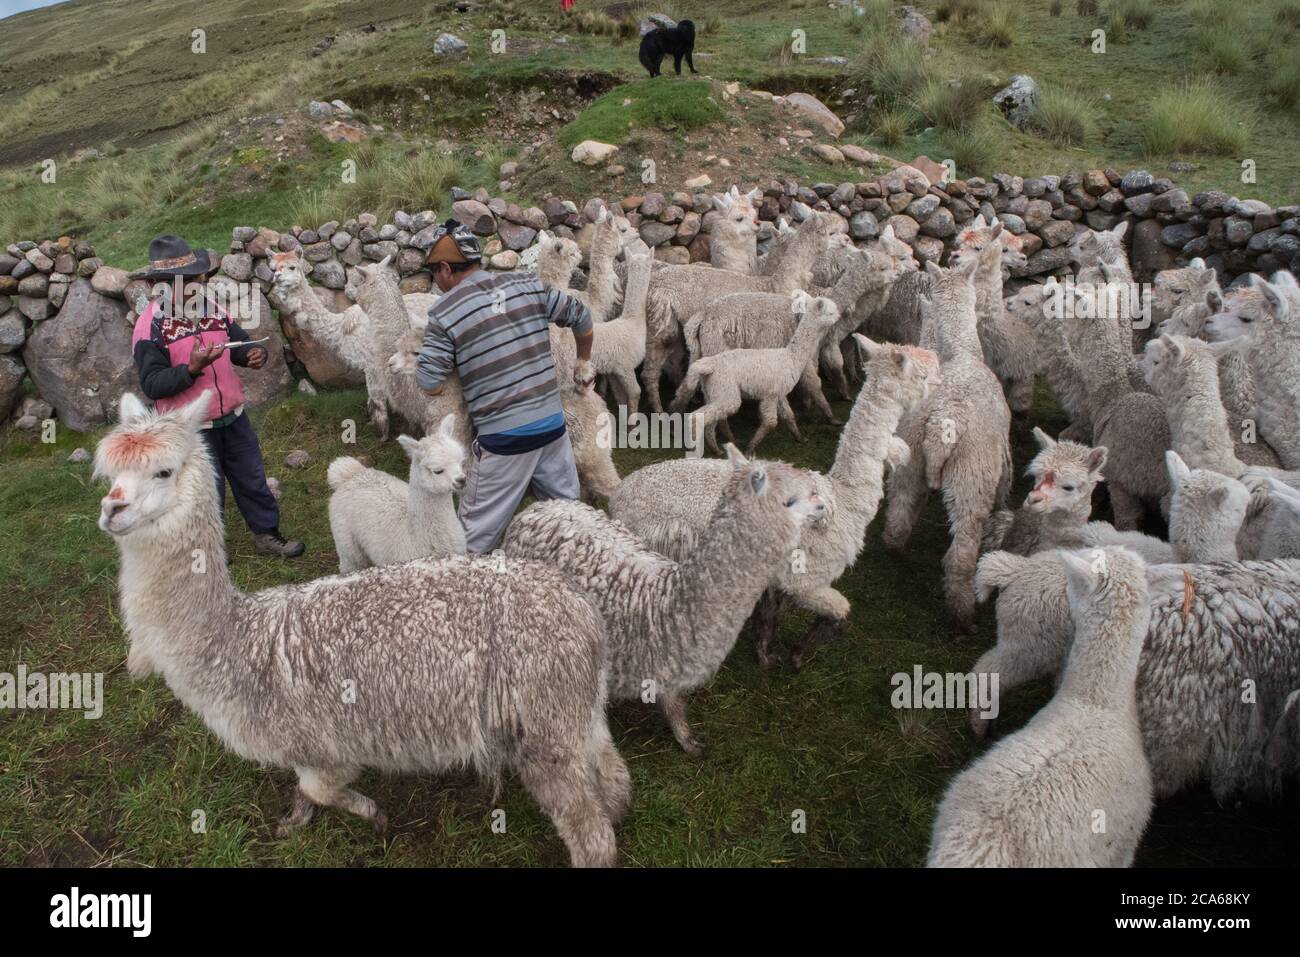 Herding alpaca in a Peruvian community in the Andes, getting them ready for a health check. Stock Photo